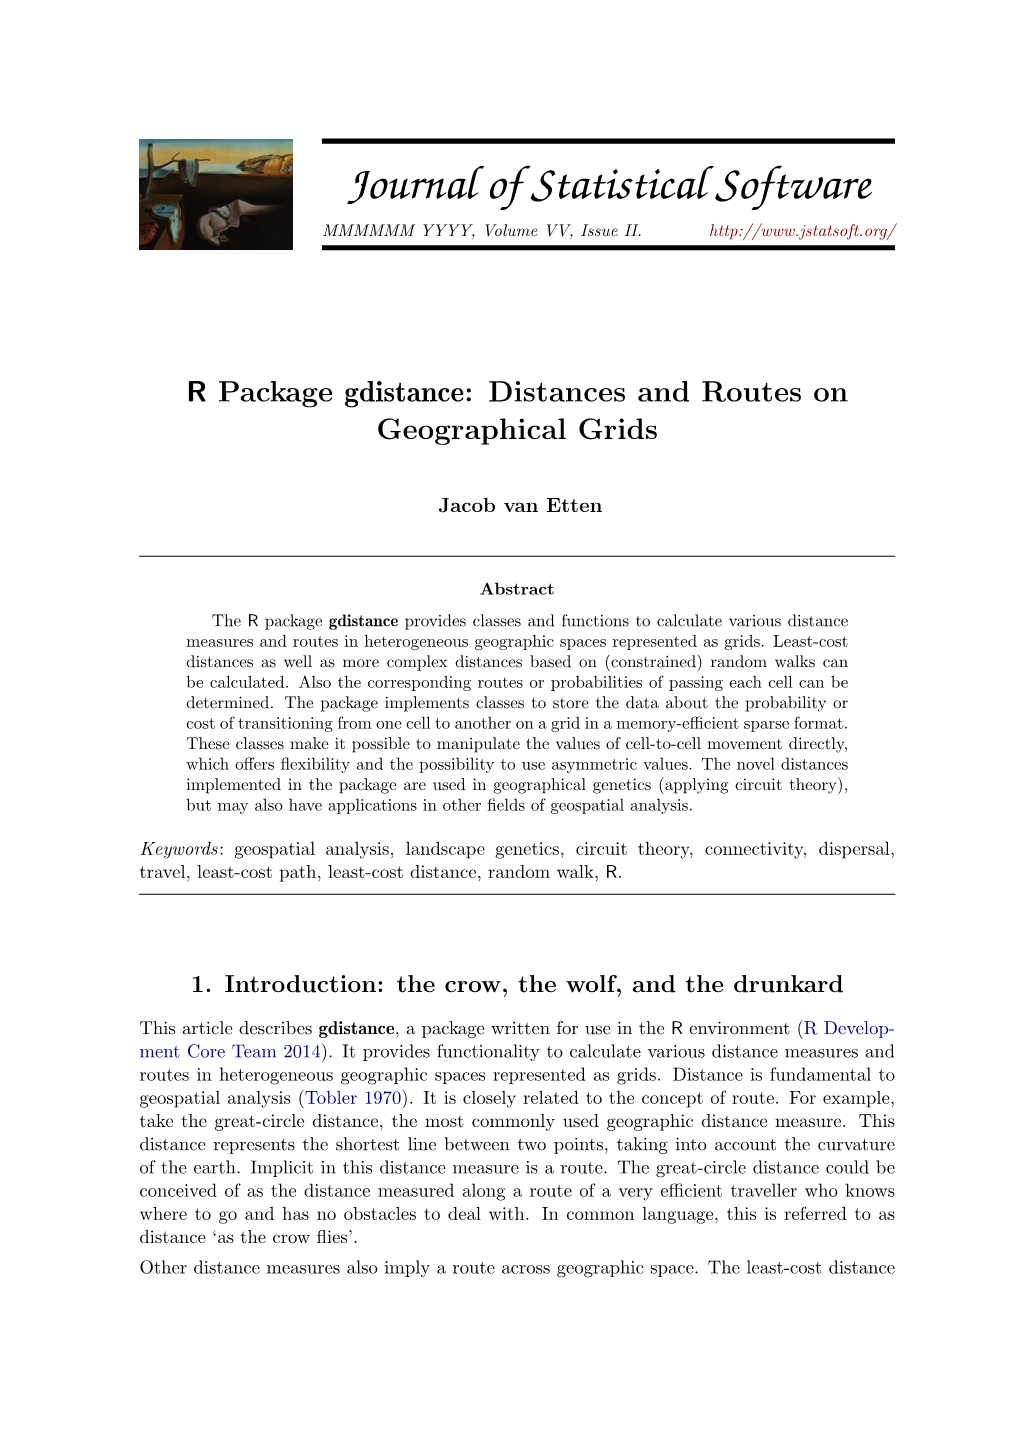 R Package Gdistance: Distances and Routes on Geographical Grids